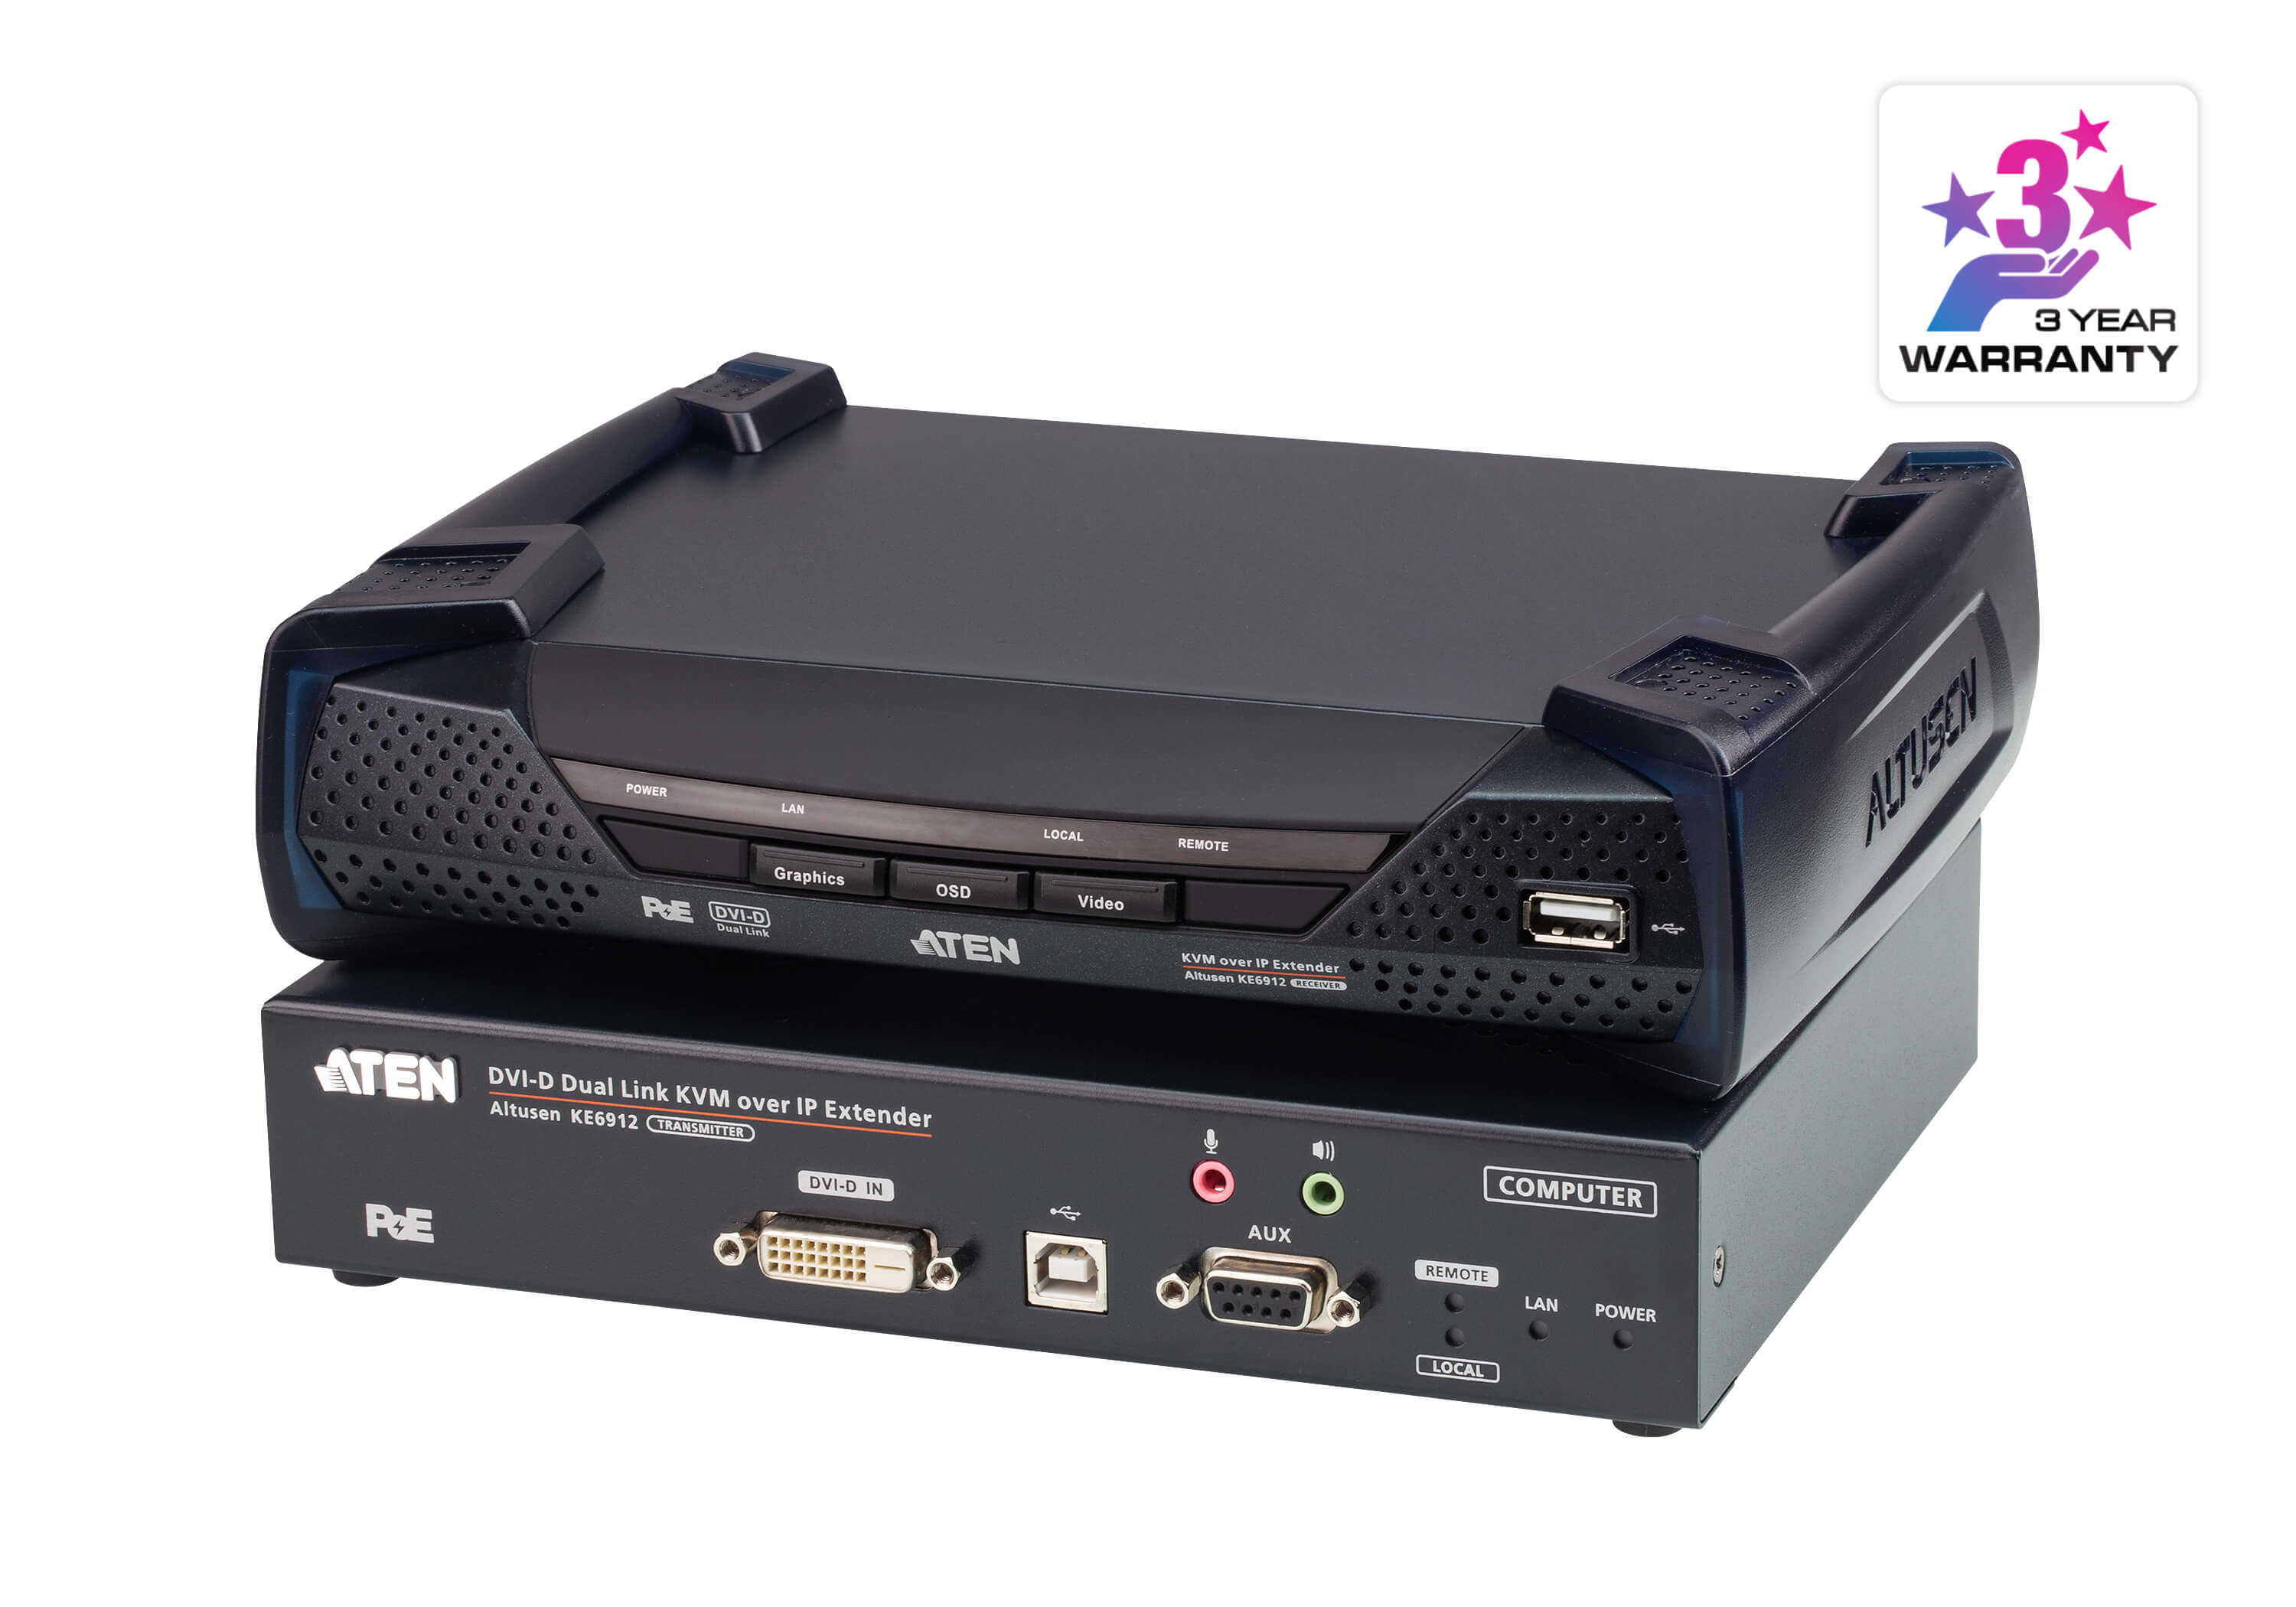 Aten DVI Dual Link KVM over IP Extender with DC Power + Power over Ethernet support, supports up to 2560 x 1600 @ 60 Hz, USB and 3.5mm Audio